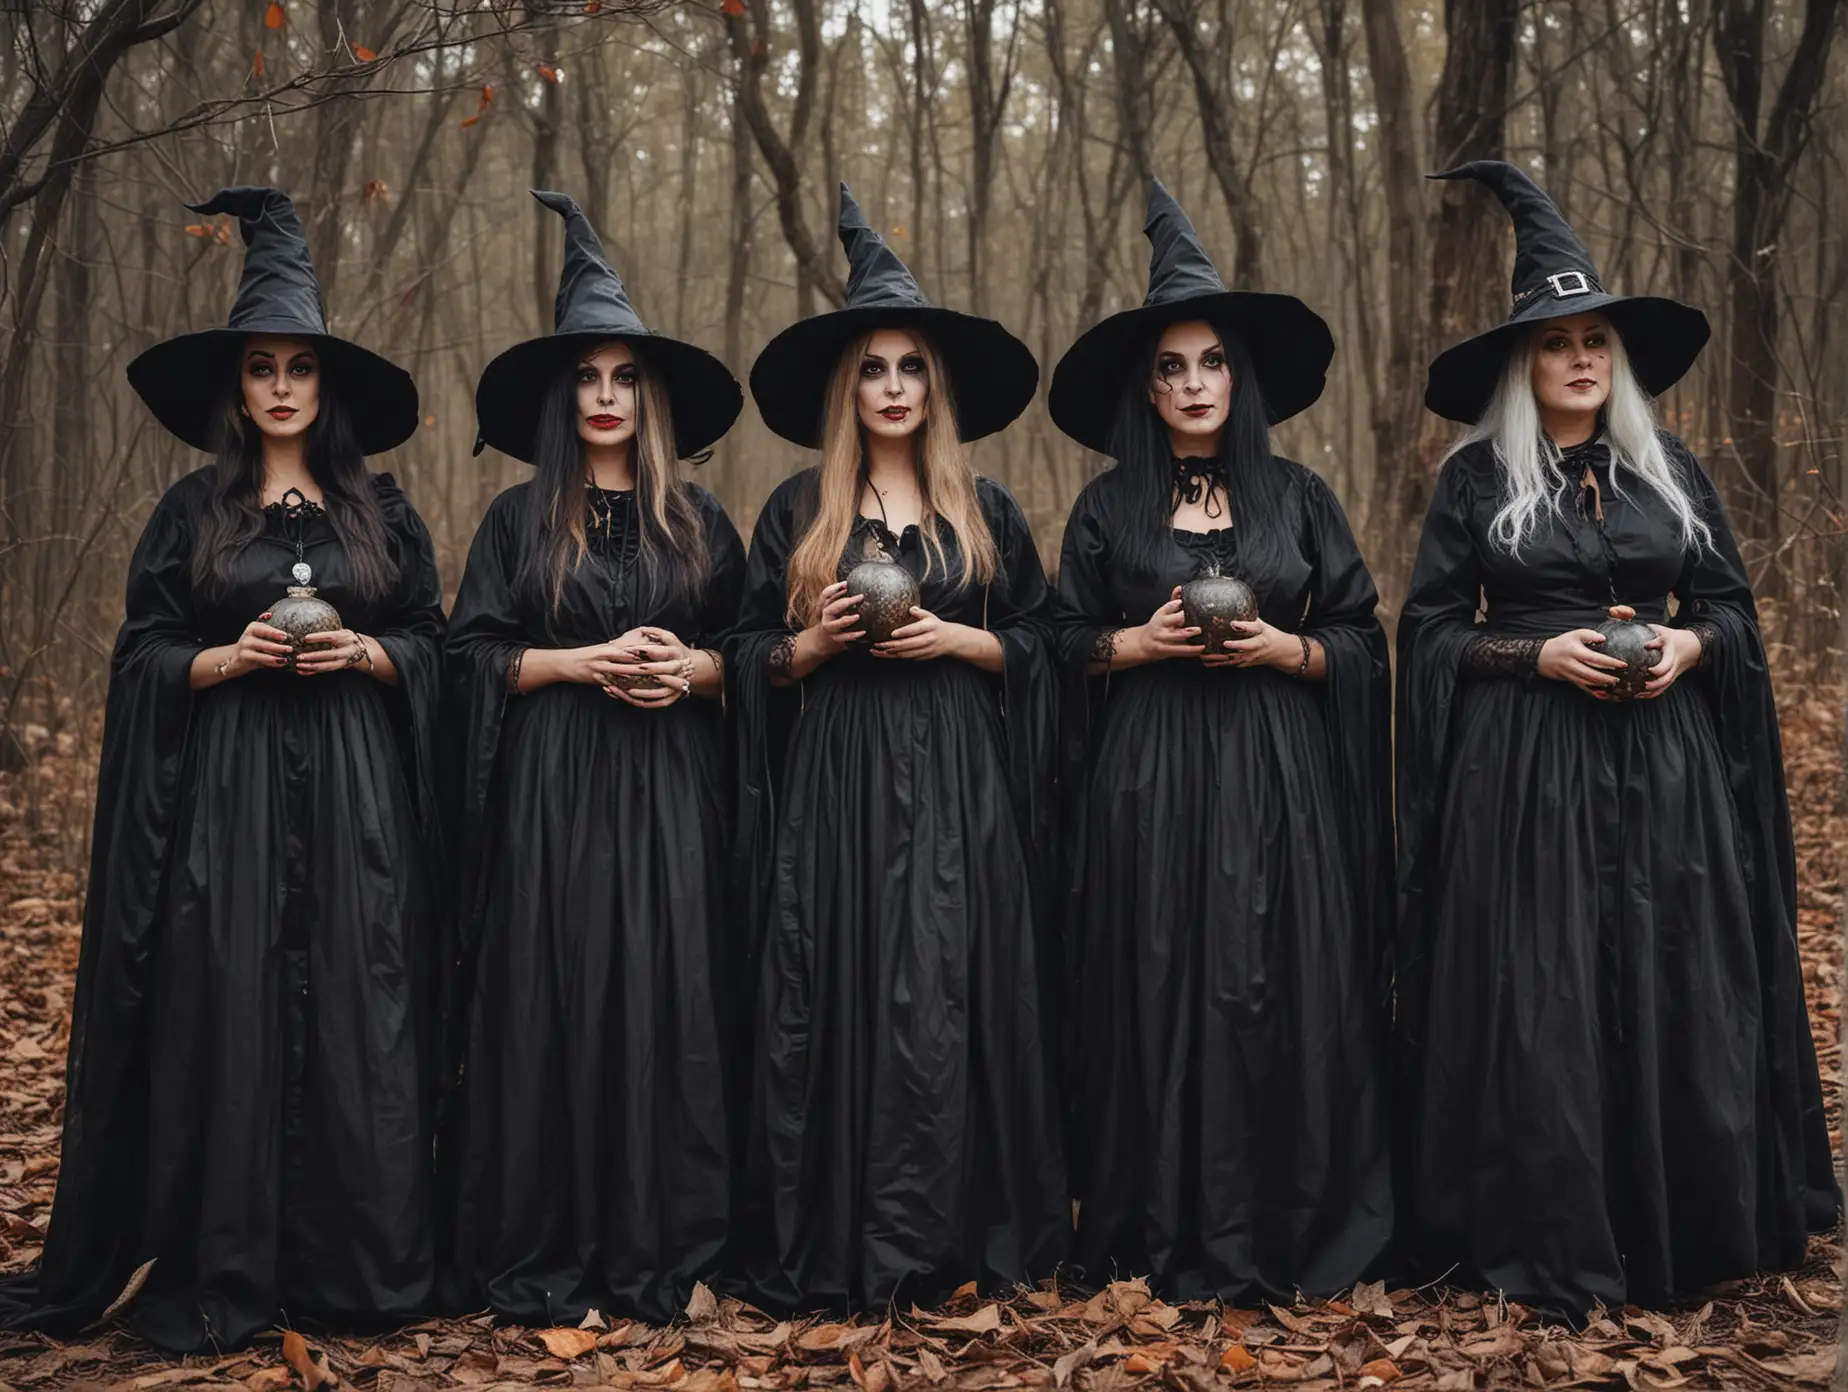 Witches dressed for Halloween 